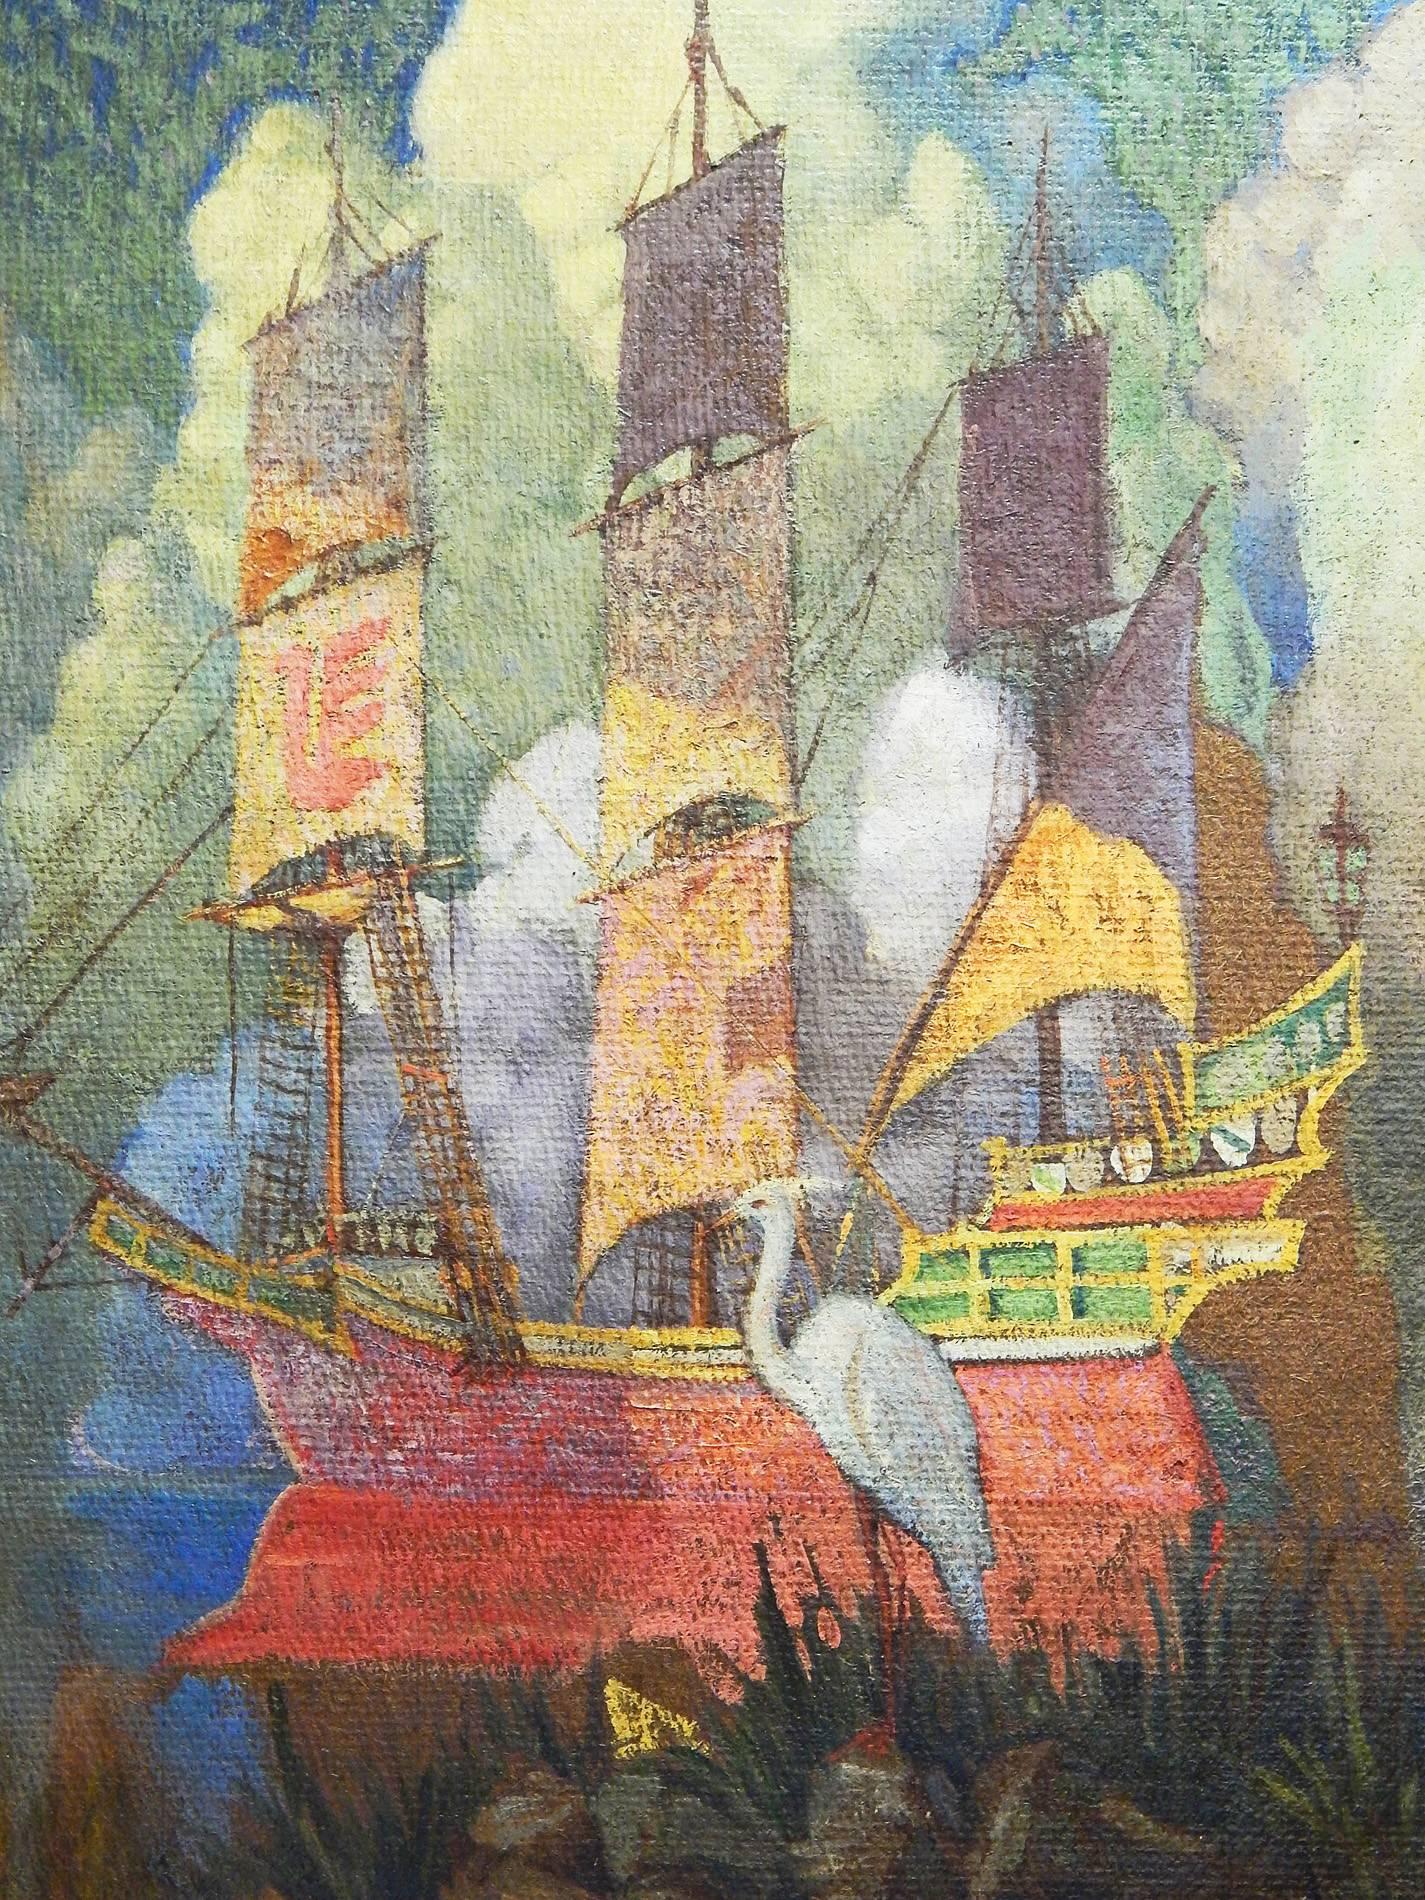 Comparable to the best of N. C. Wyeth's great illustration paintings, this color-saturated and highly atmospheric depiction of an old Spanish ship along the Florida coast, with clouds piled up high in the distance and a snowy egret in the